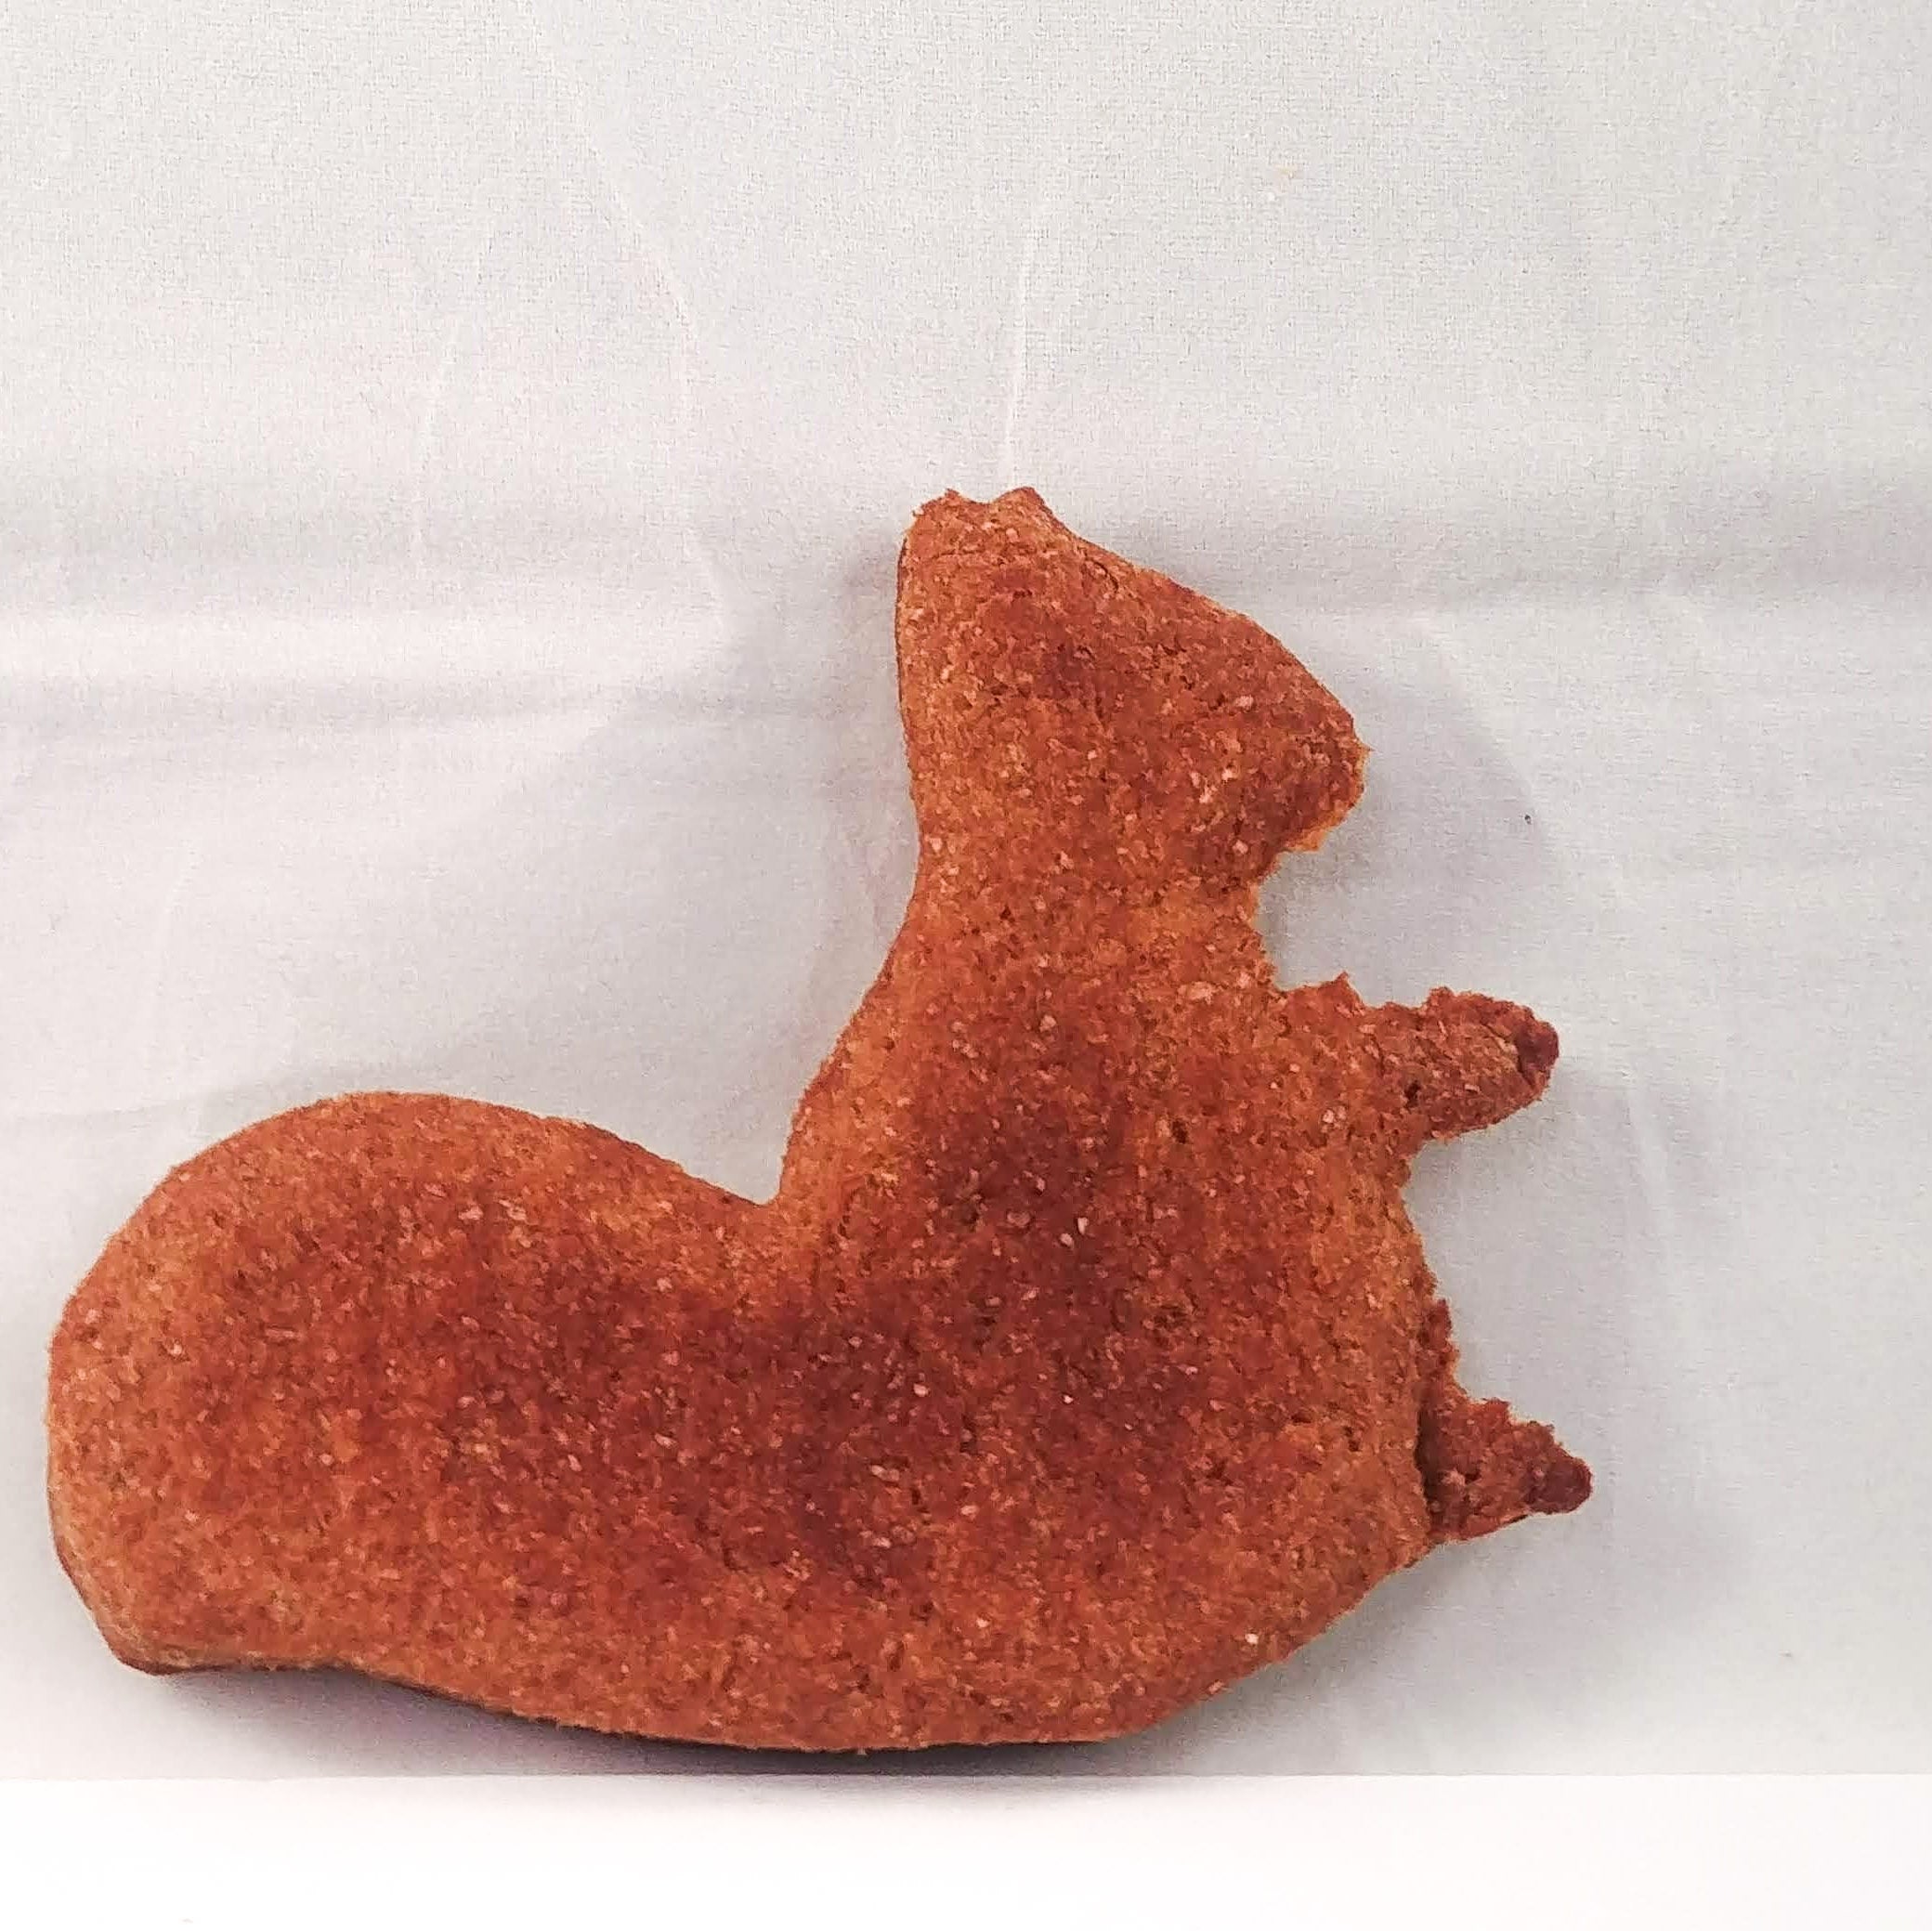 SQUIRREL! Celebrate Your Dog's Enemy with a Peanut Butter Cookie